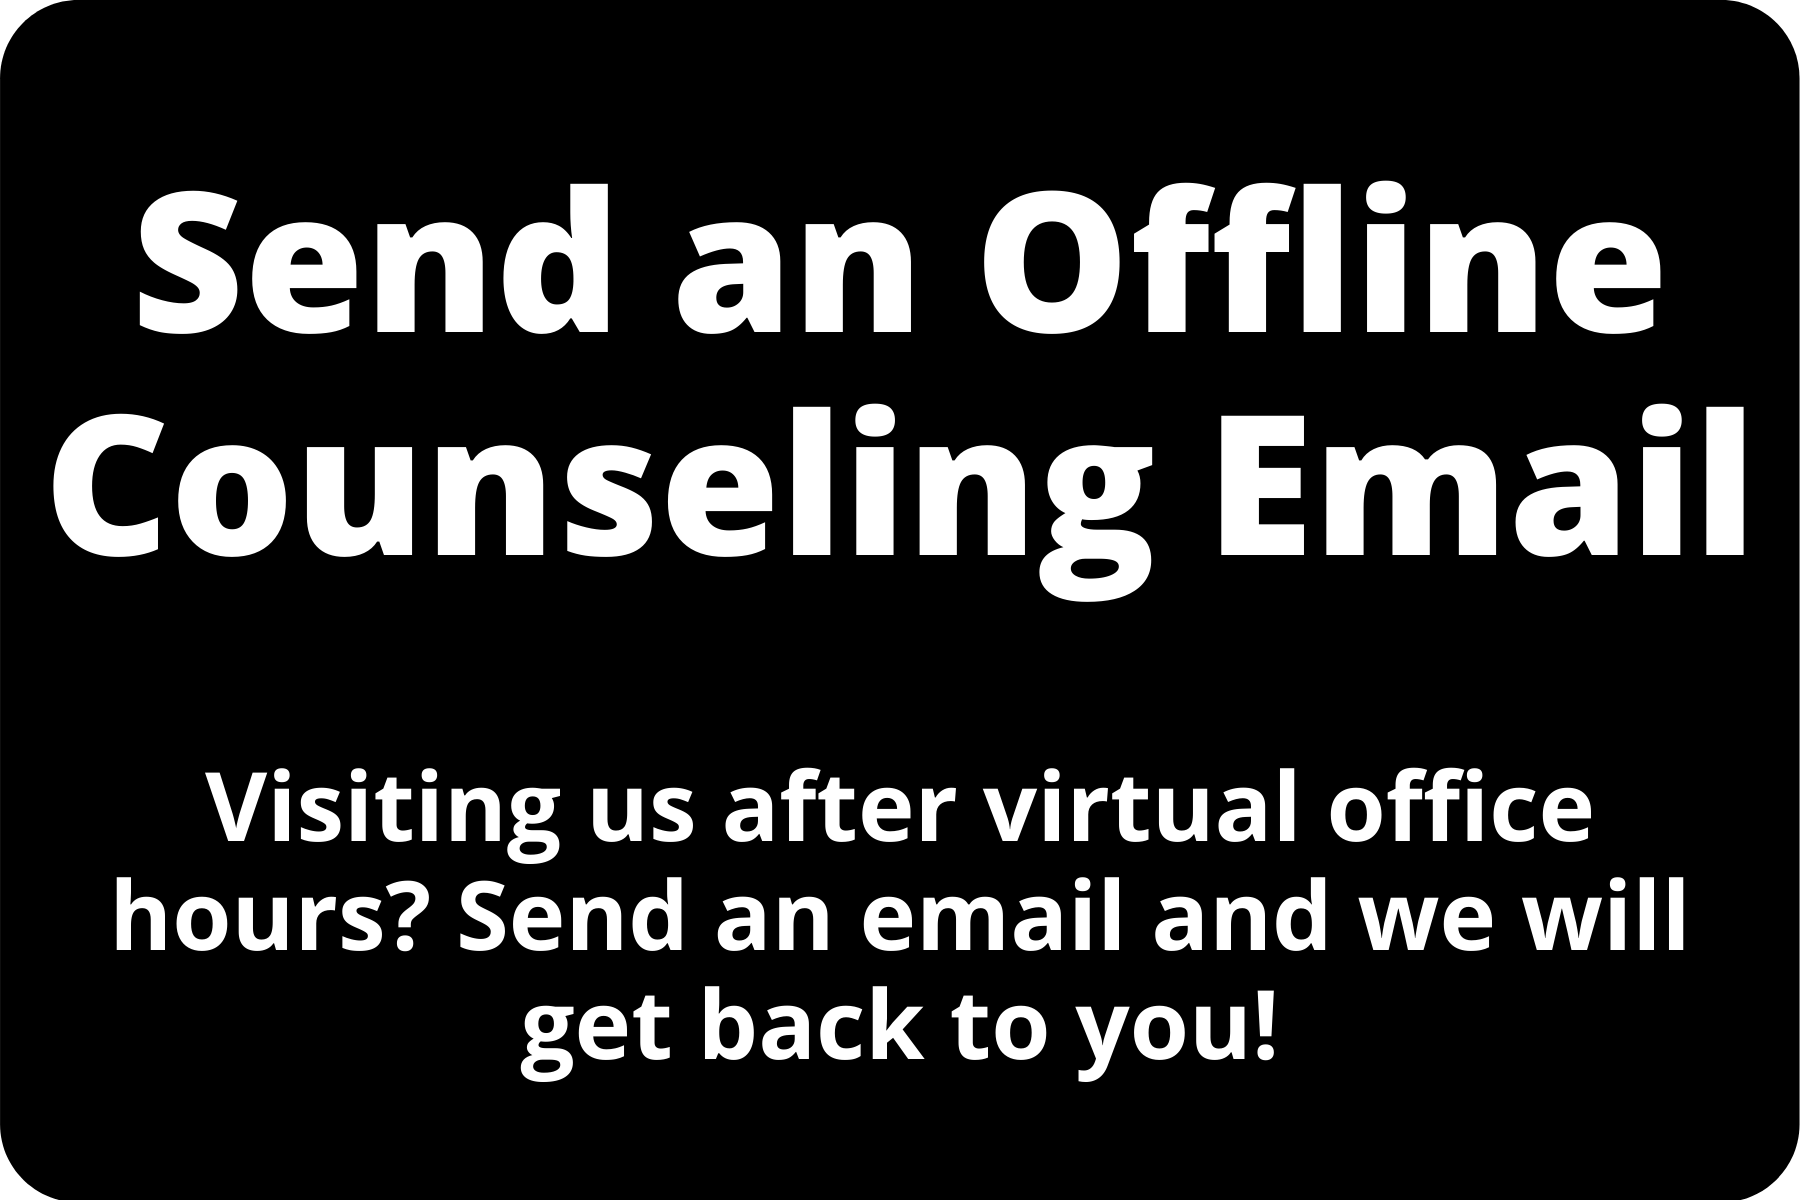 Send an Offline Counseling Email. Visiting us after virtual office hours? Send an email and we will get back to you.